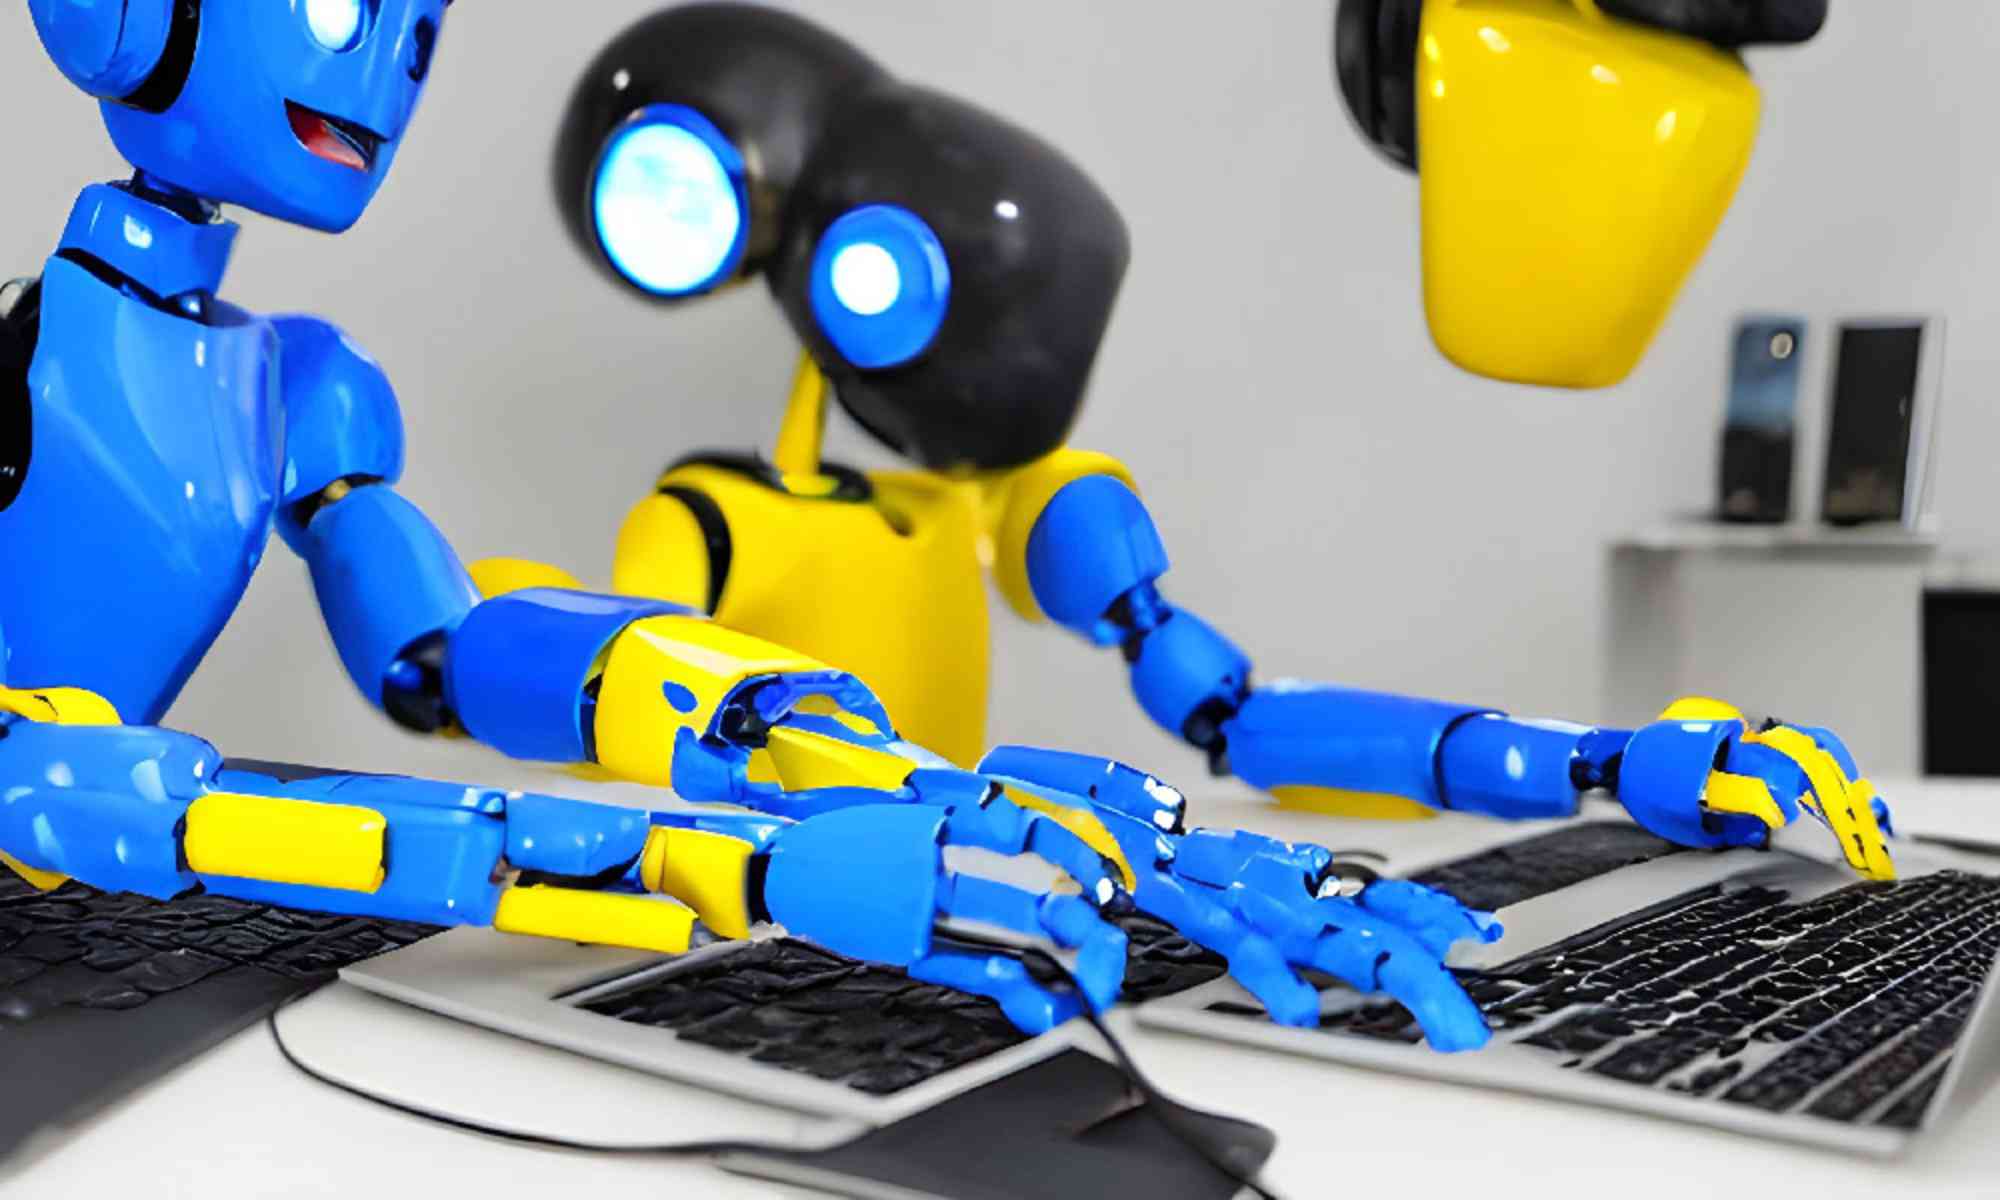 AI-created image of two yellow-and-blue robots working at a laptop.